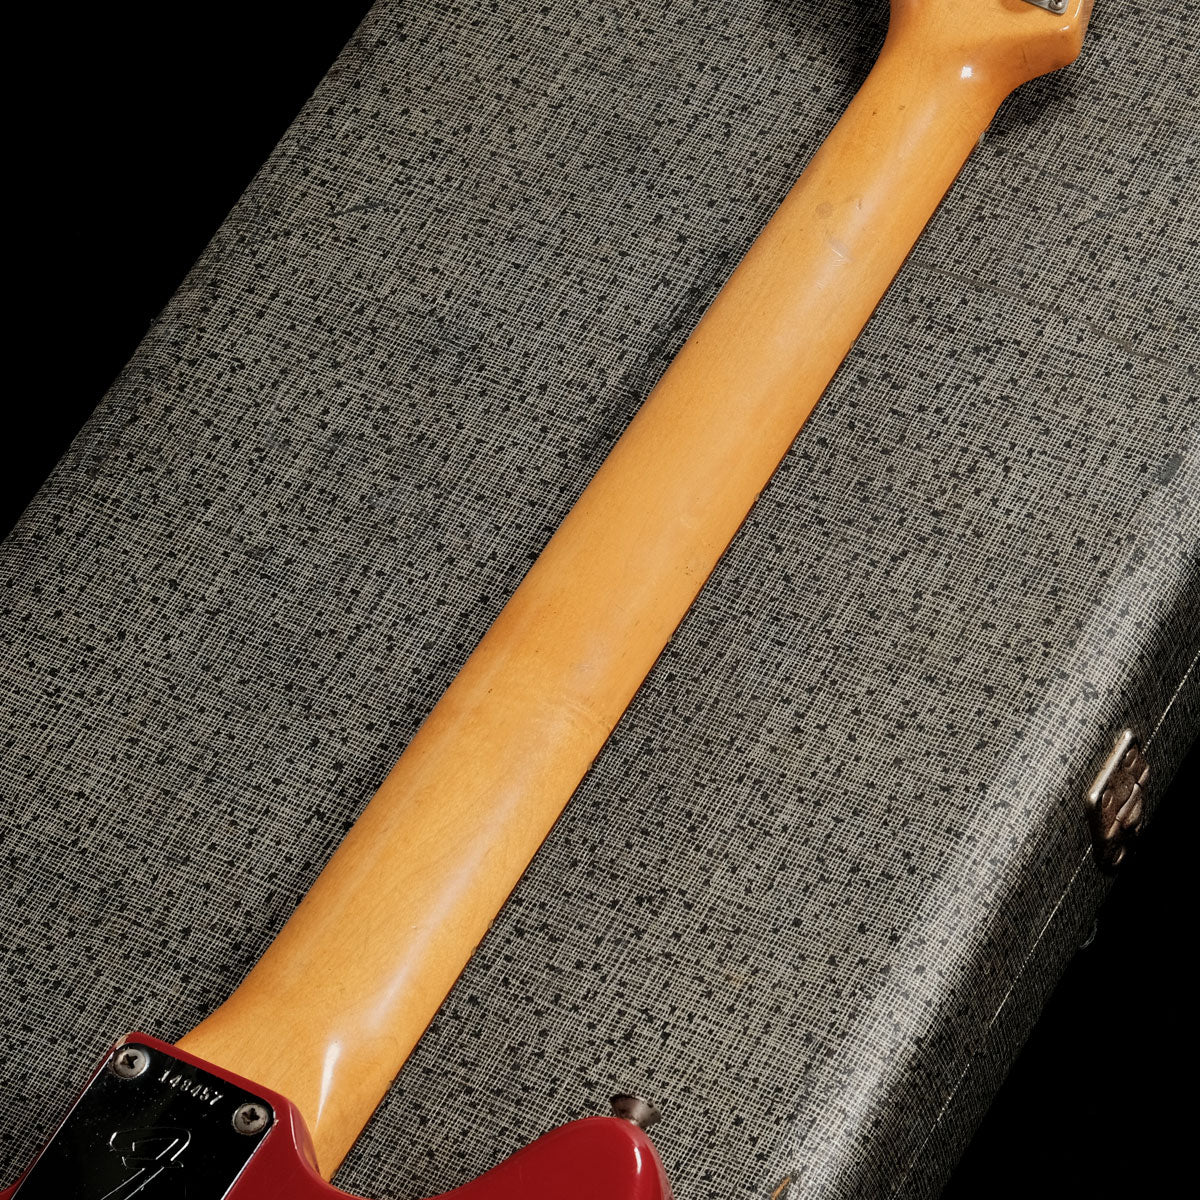 [SN 148457] USED FENDER / 1966 Mustang Red -B Neck- [05]